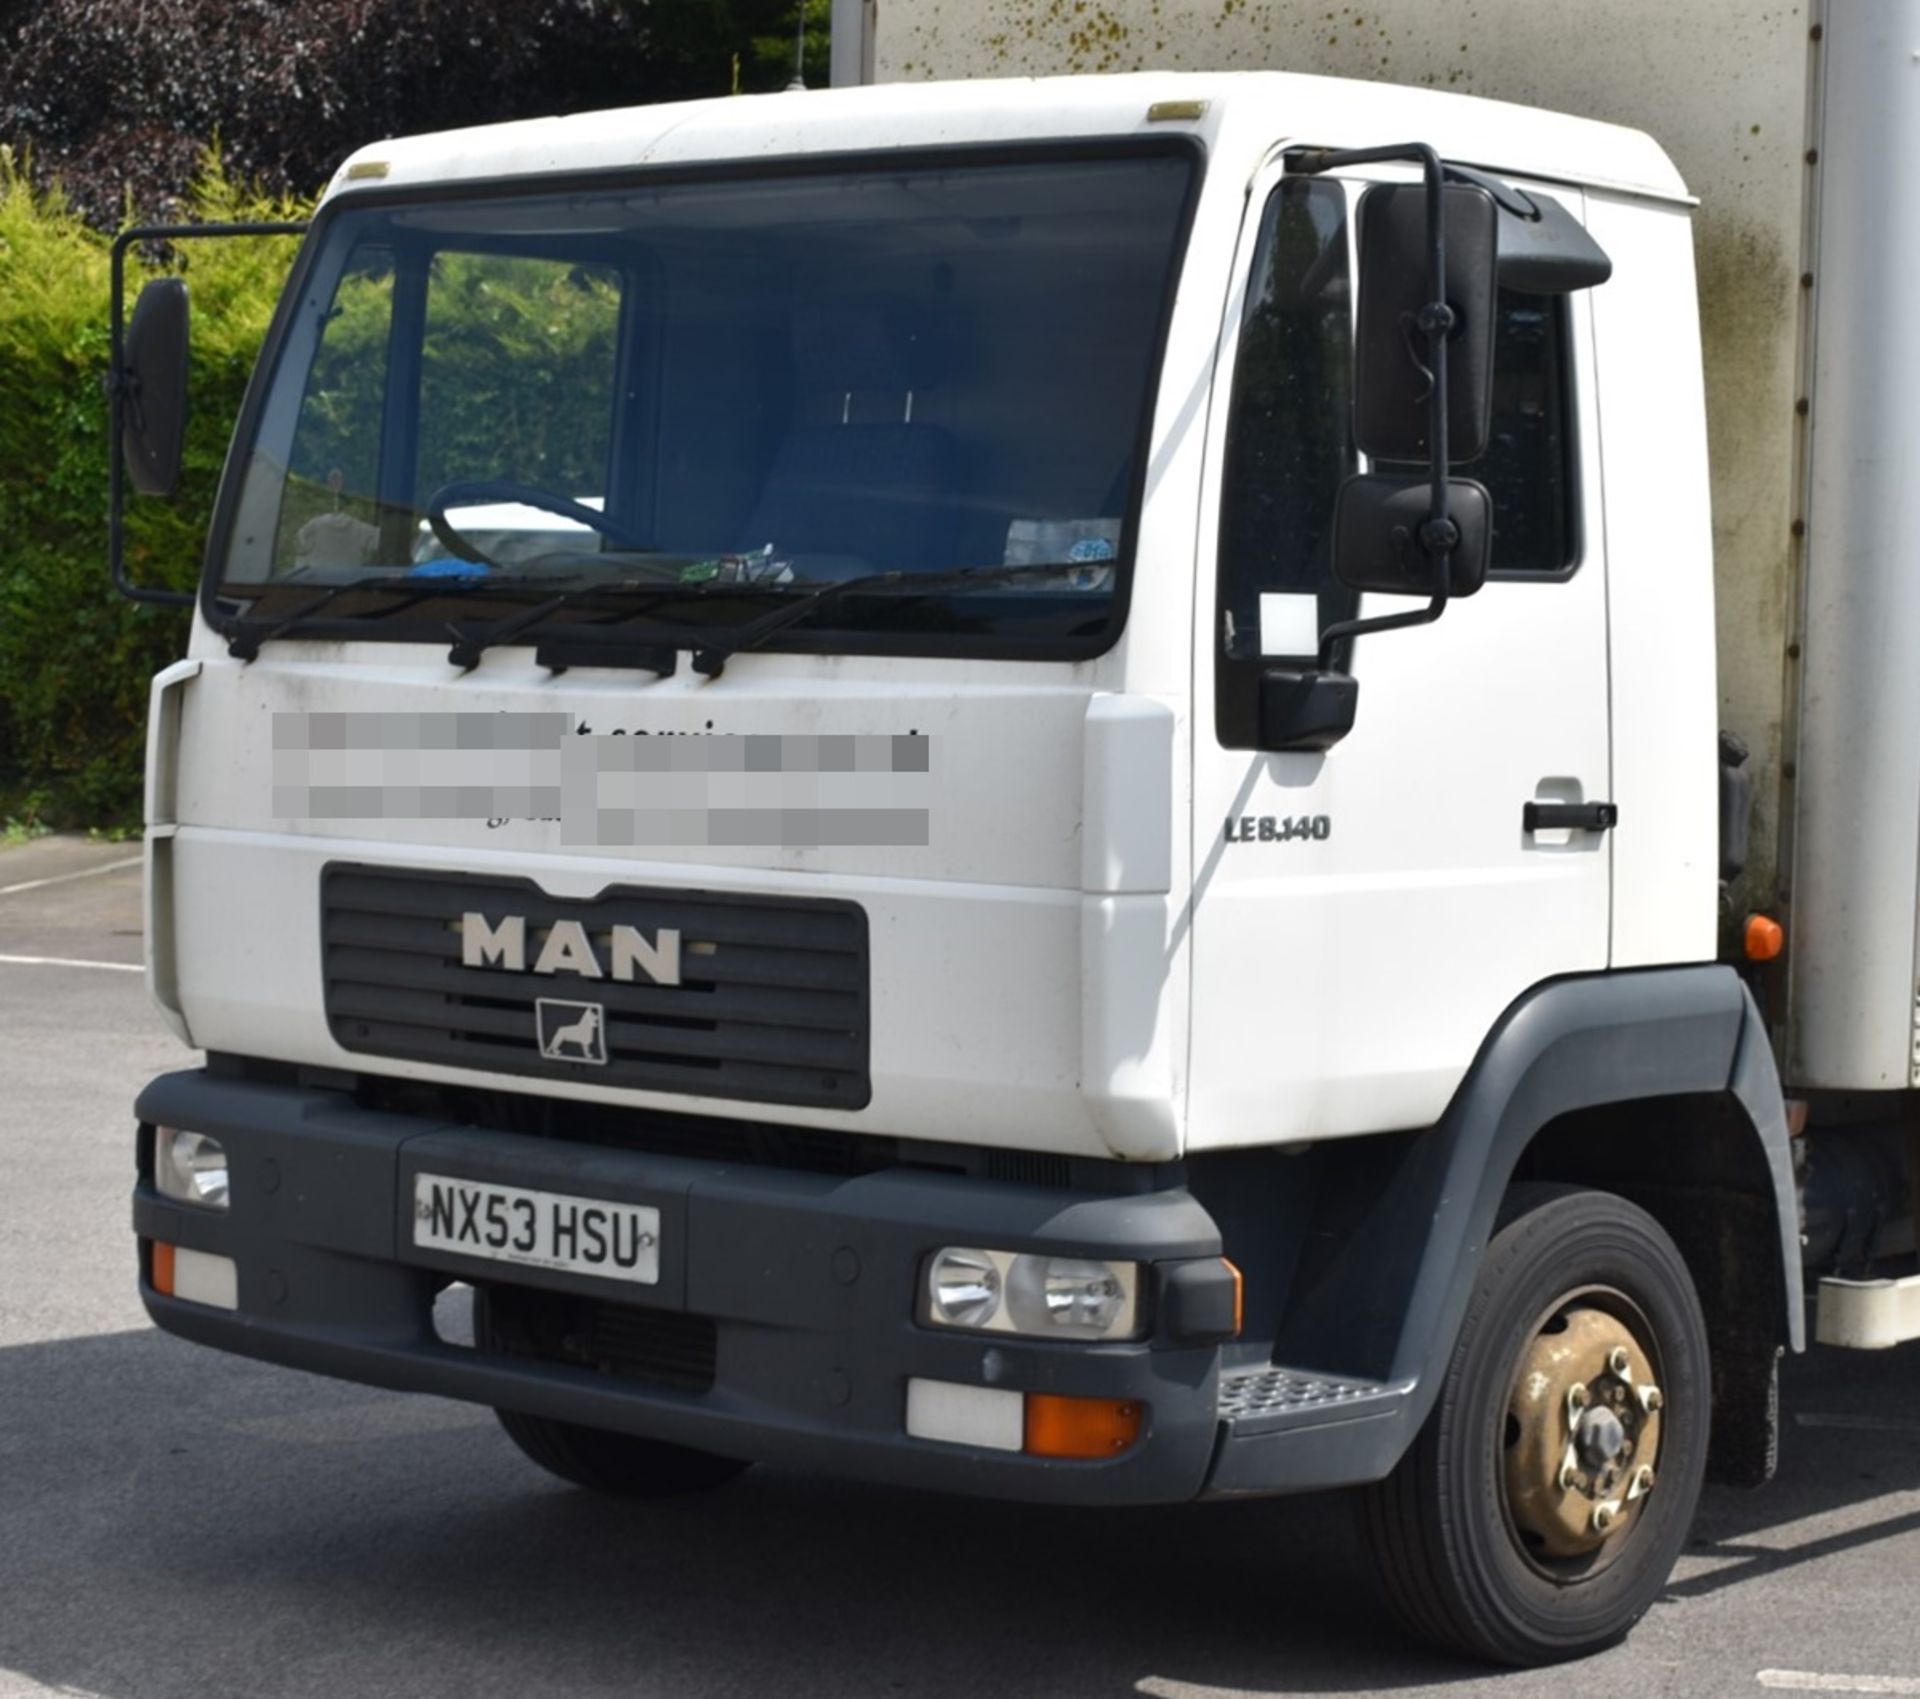 1 x 2003 MAN LE8.140 4.6 Litre Diesel Box Truck With Tail Lift - Includes MOT, Service History, - Image 3 of 42